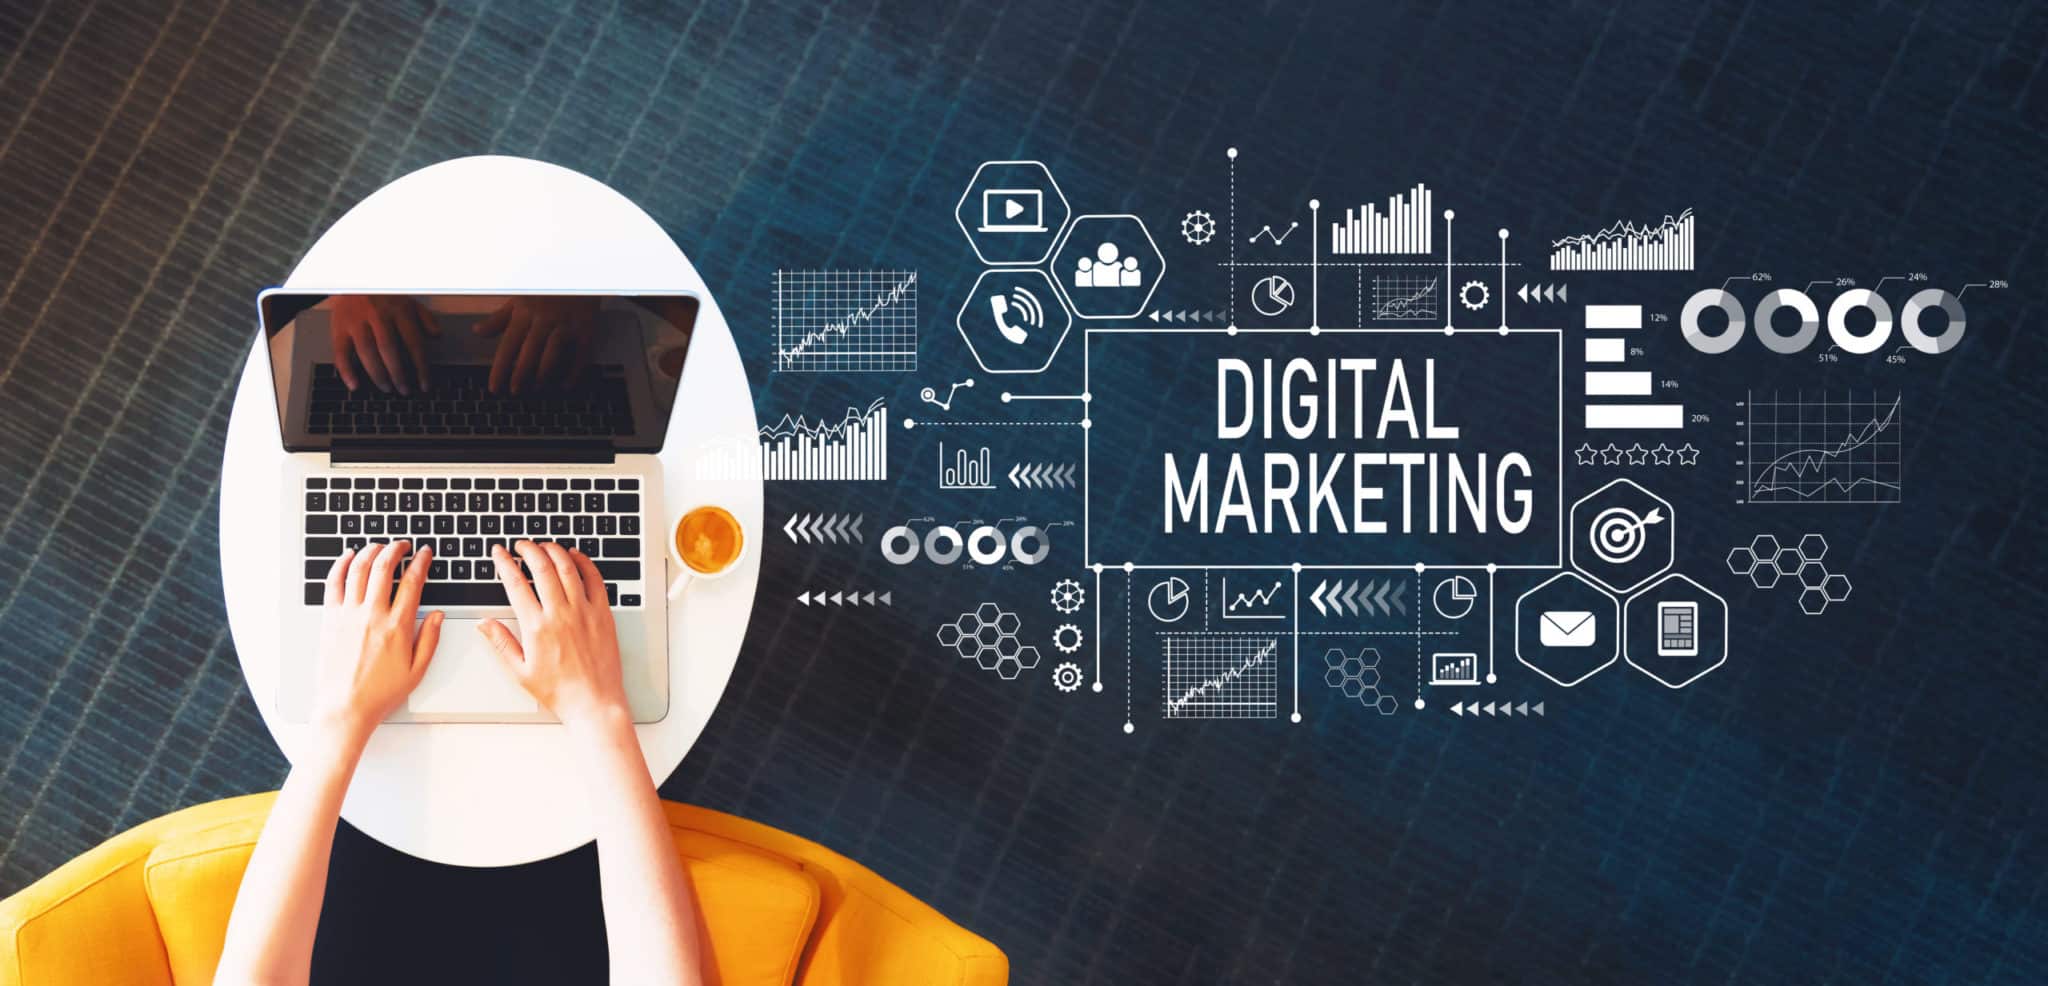 7 Effective Digital Marketing Strategies for Small Businesses